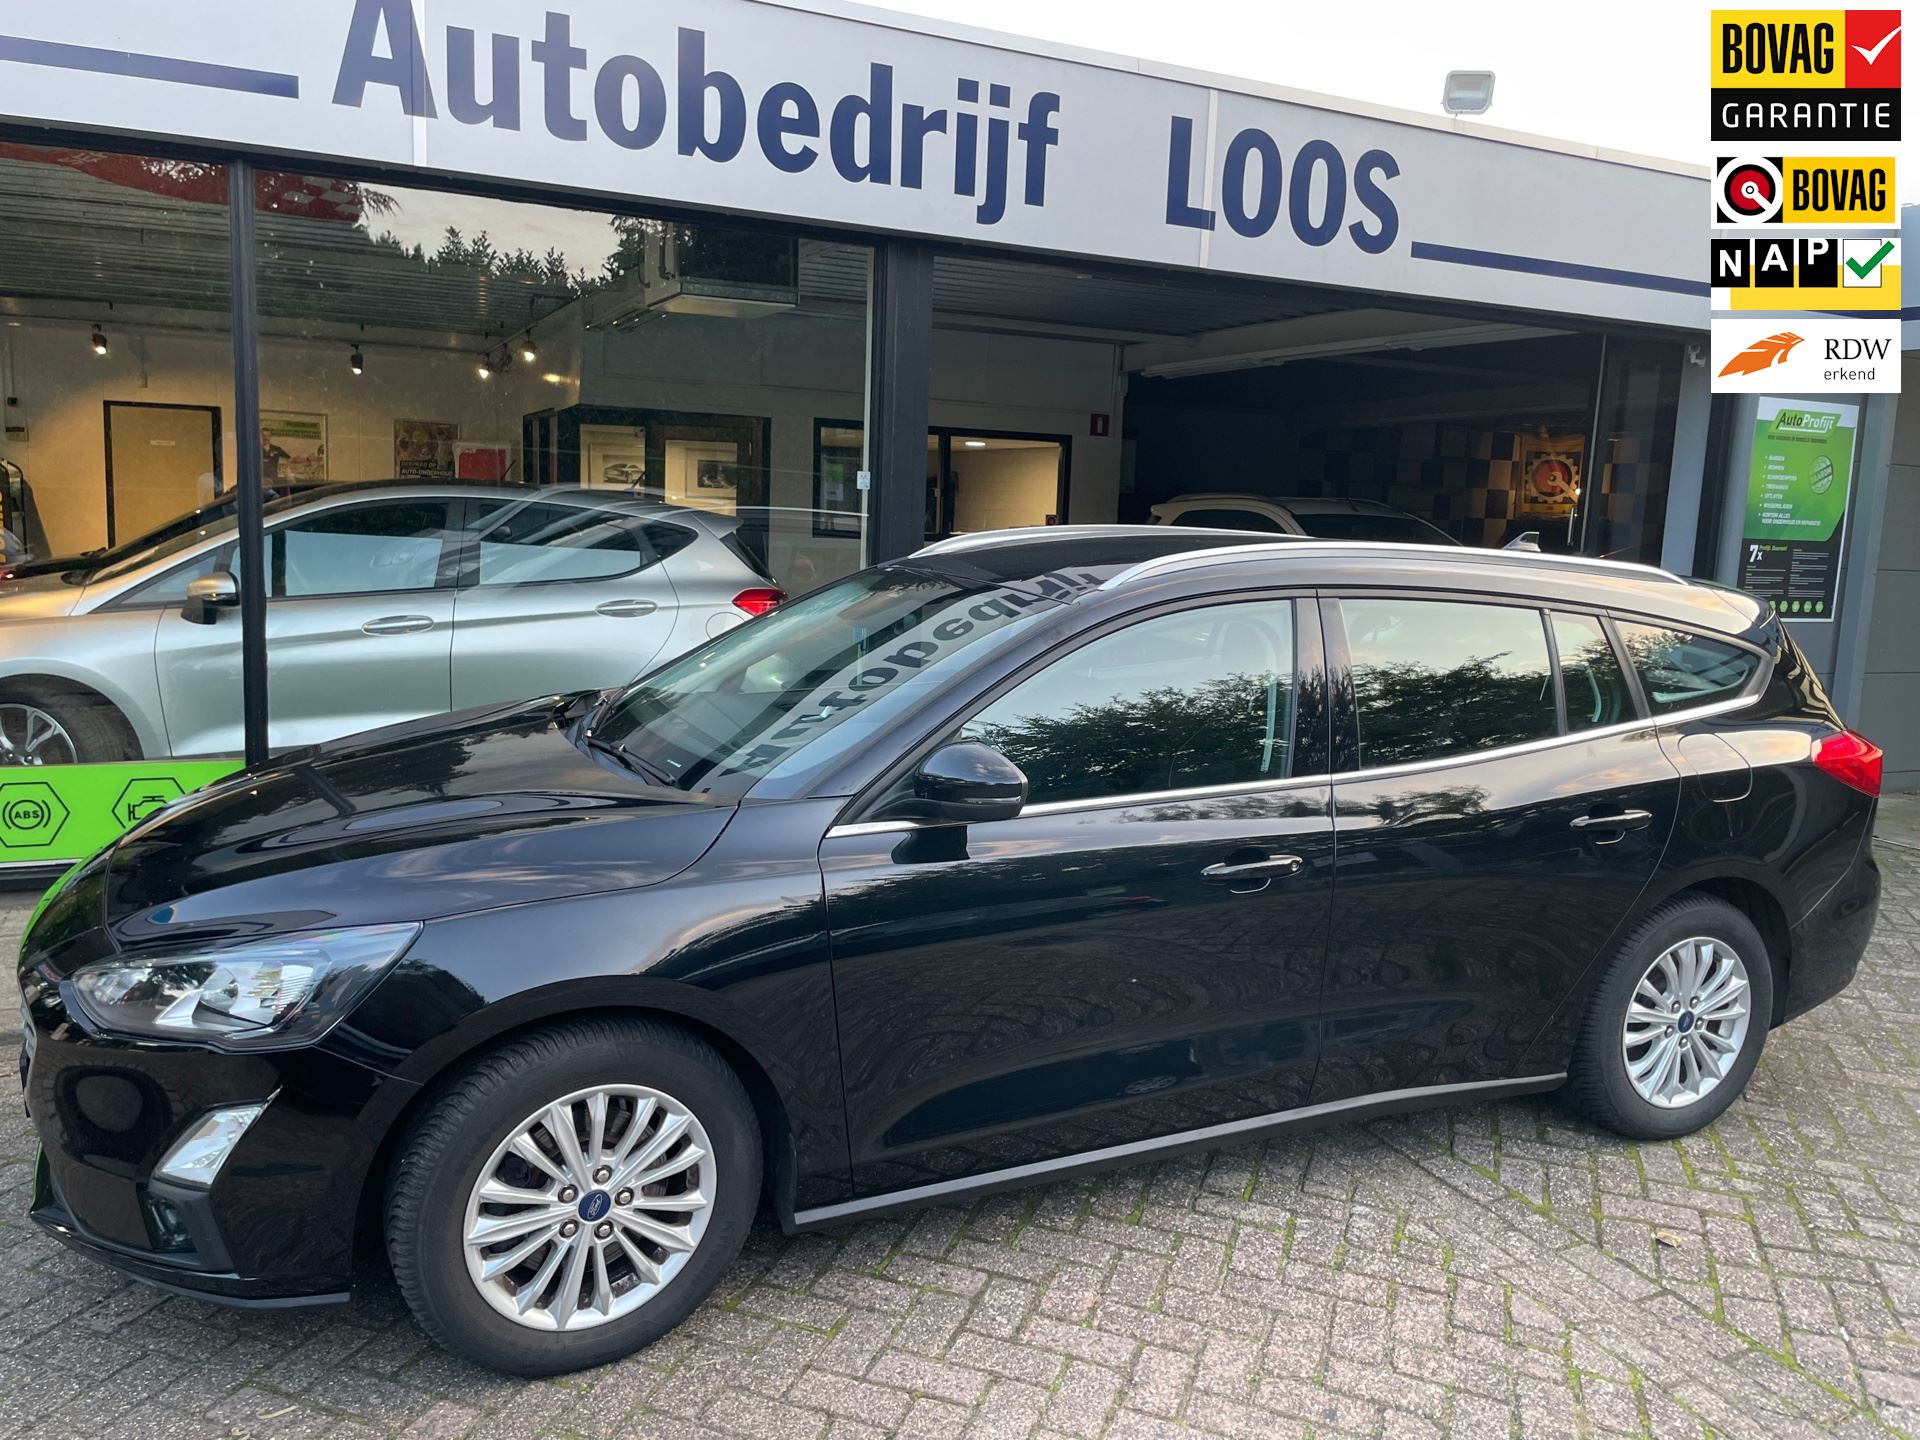 Ford Focus Wagon occasion - Bovag Autobedrijf Loos